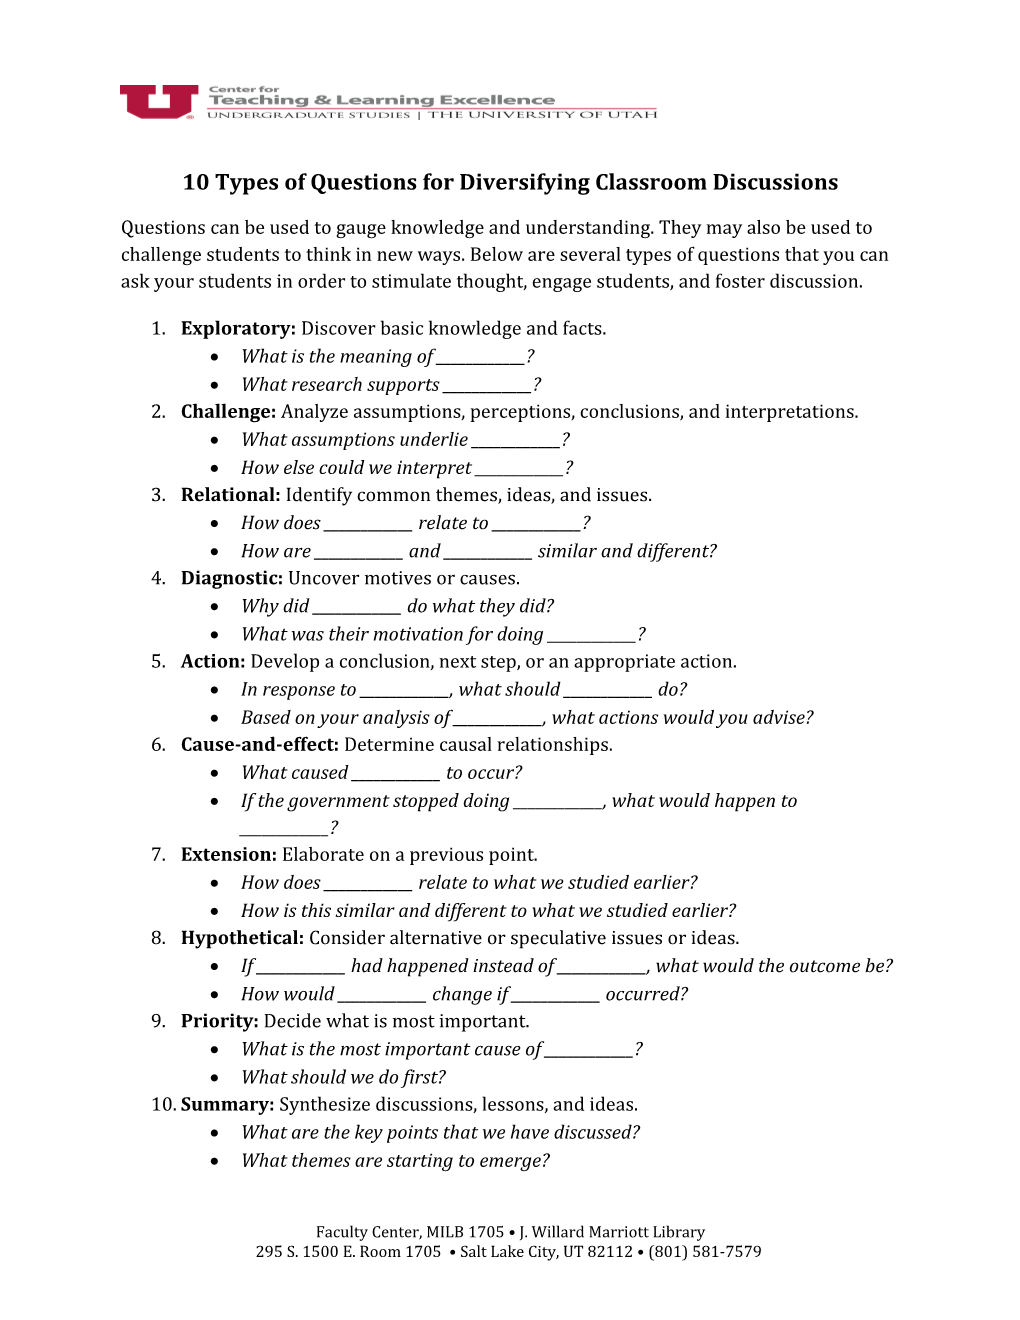 10 Types of Questions for Diversifying Classroom Discussions